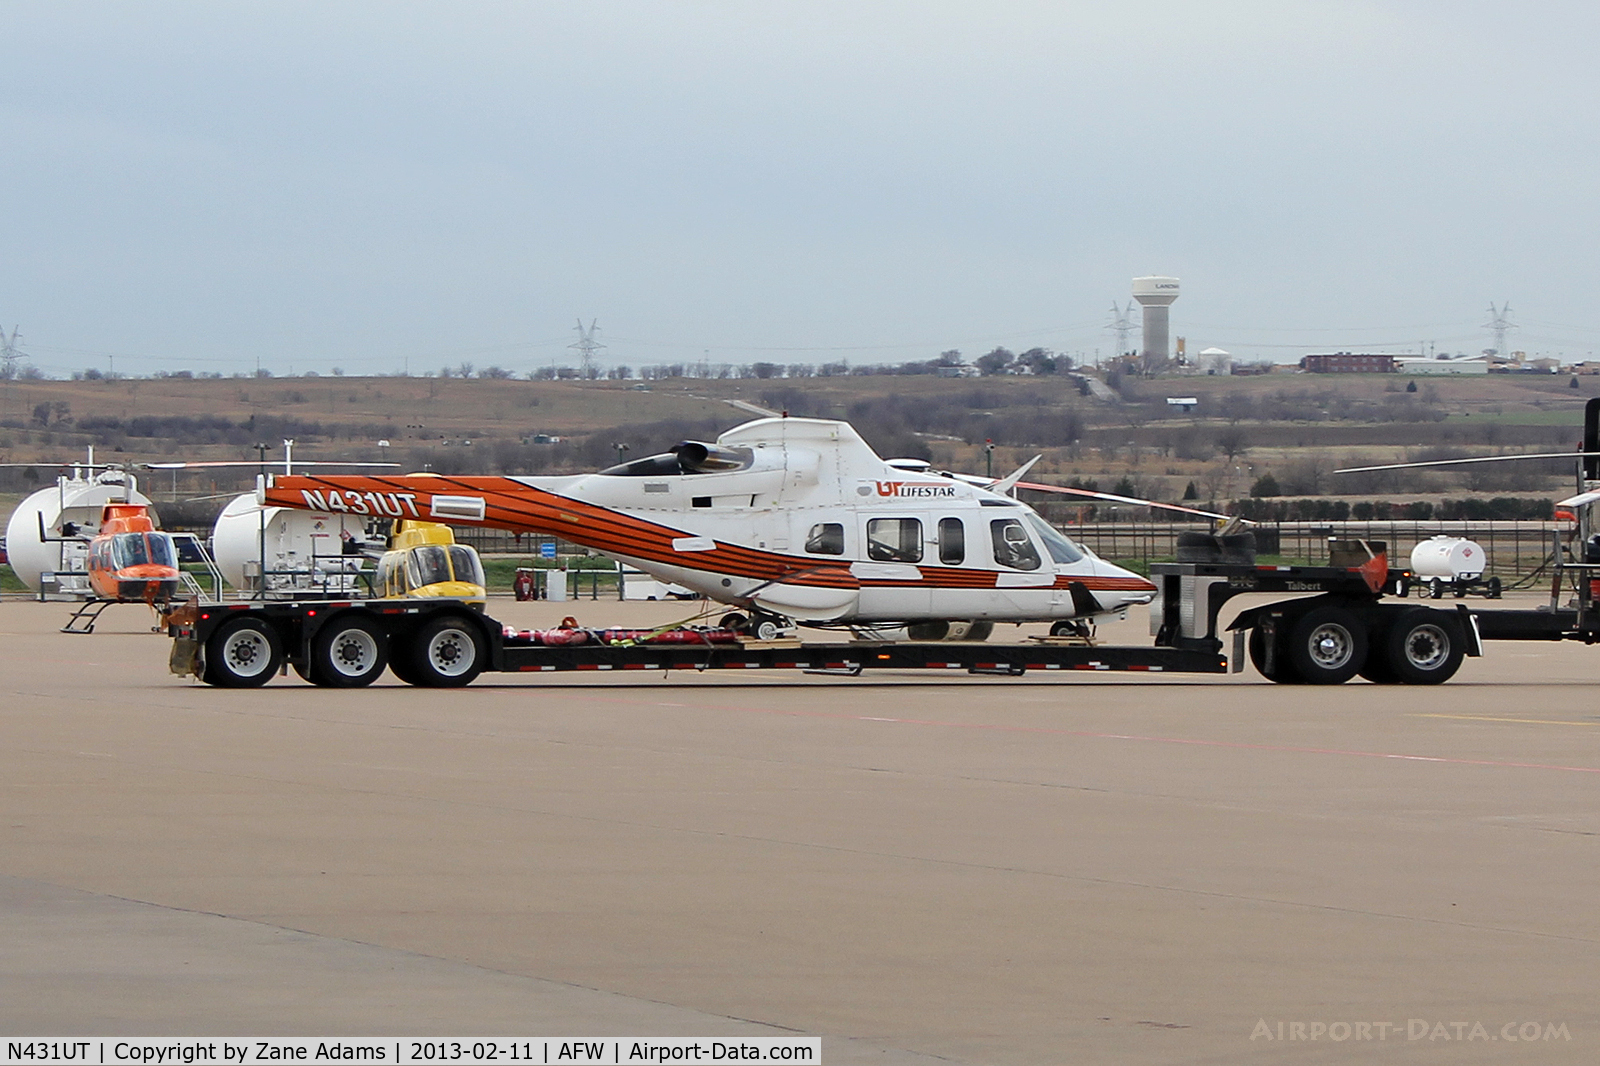 N431UT, 1996 Bell 430 C/N 49011, At Fort Worth Alliance Airport